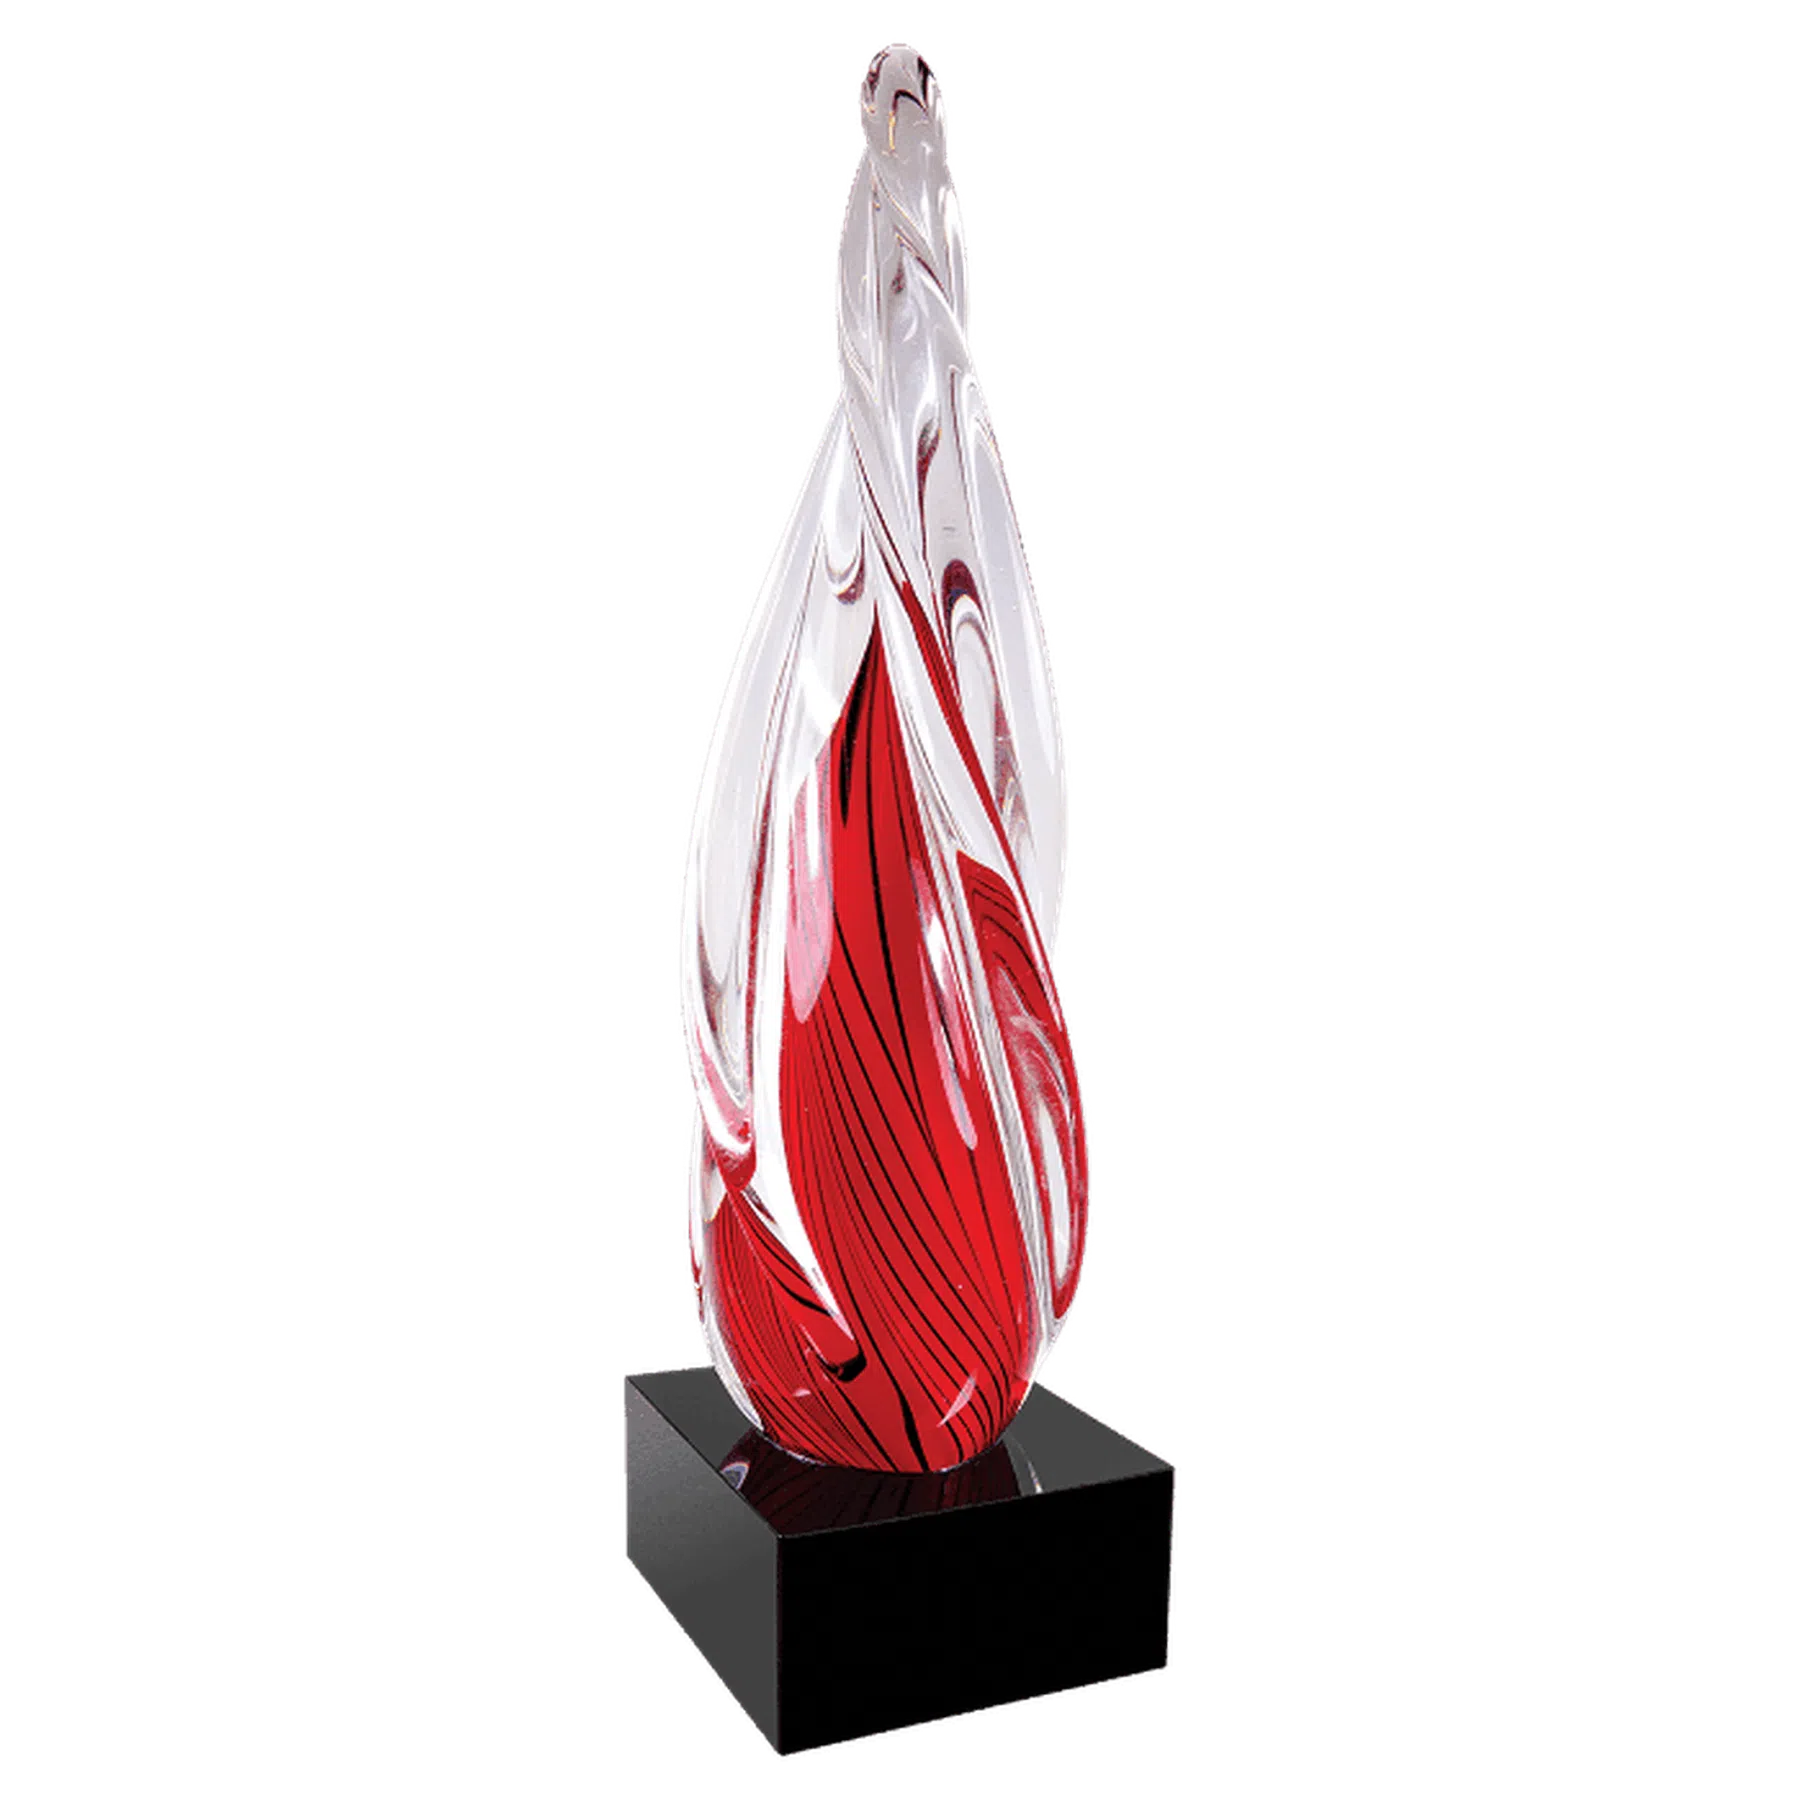 12" Red Twisted Spire Art Glass Award with Black Glass Base